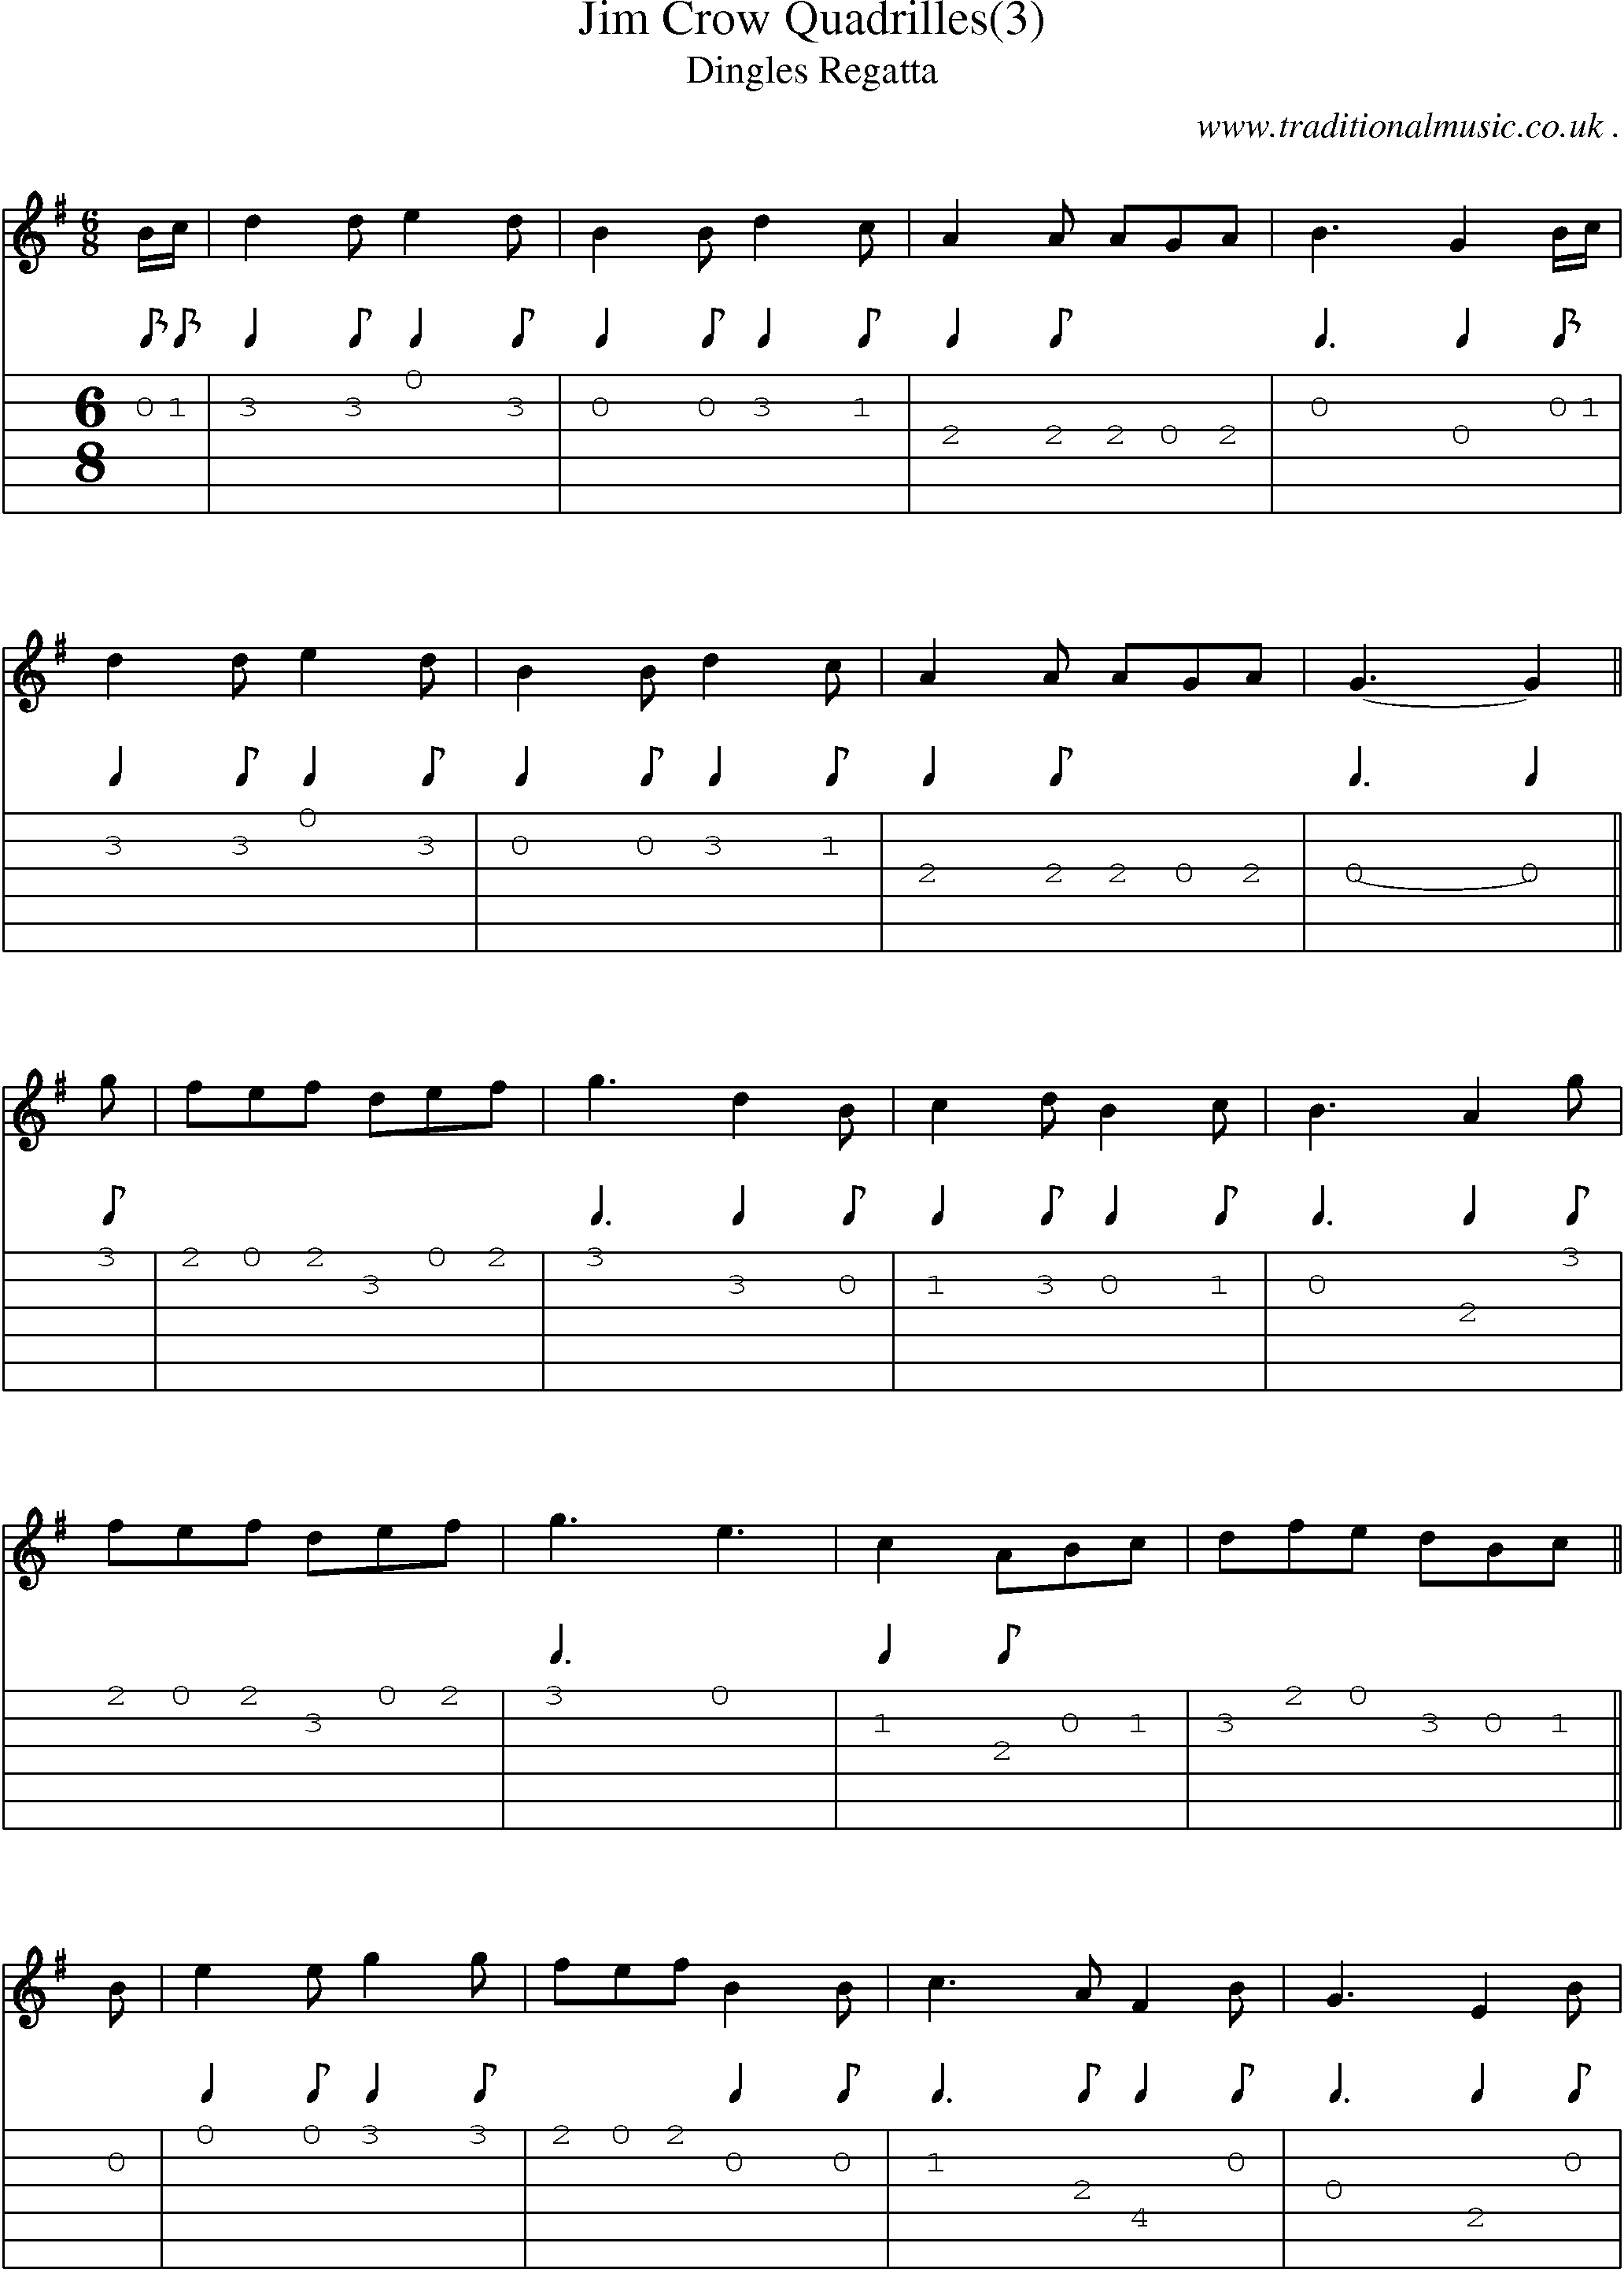 Sheet-Music and Guitar Tabs for Jim Crow Quadrilles(3)